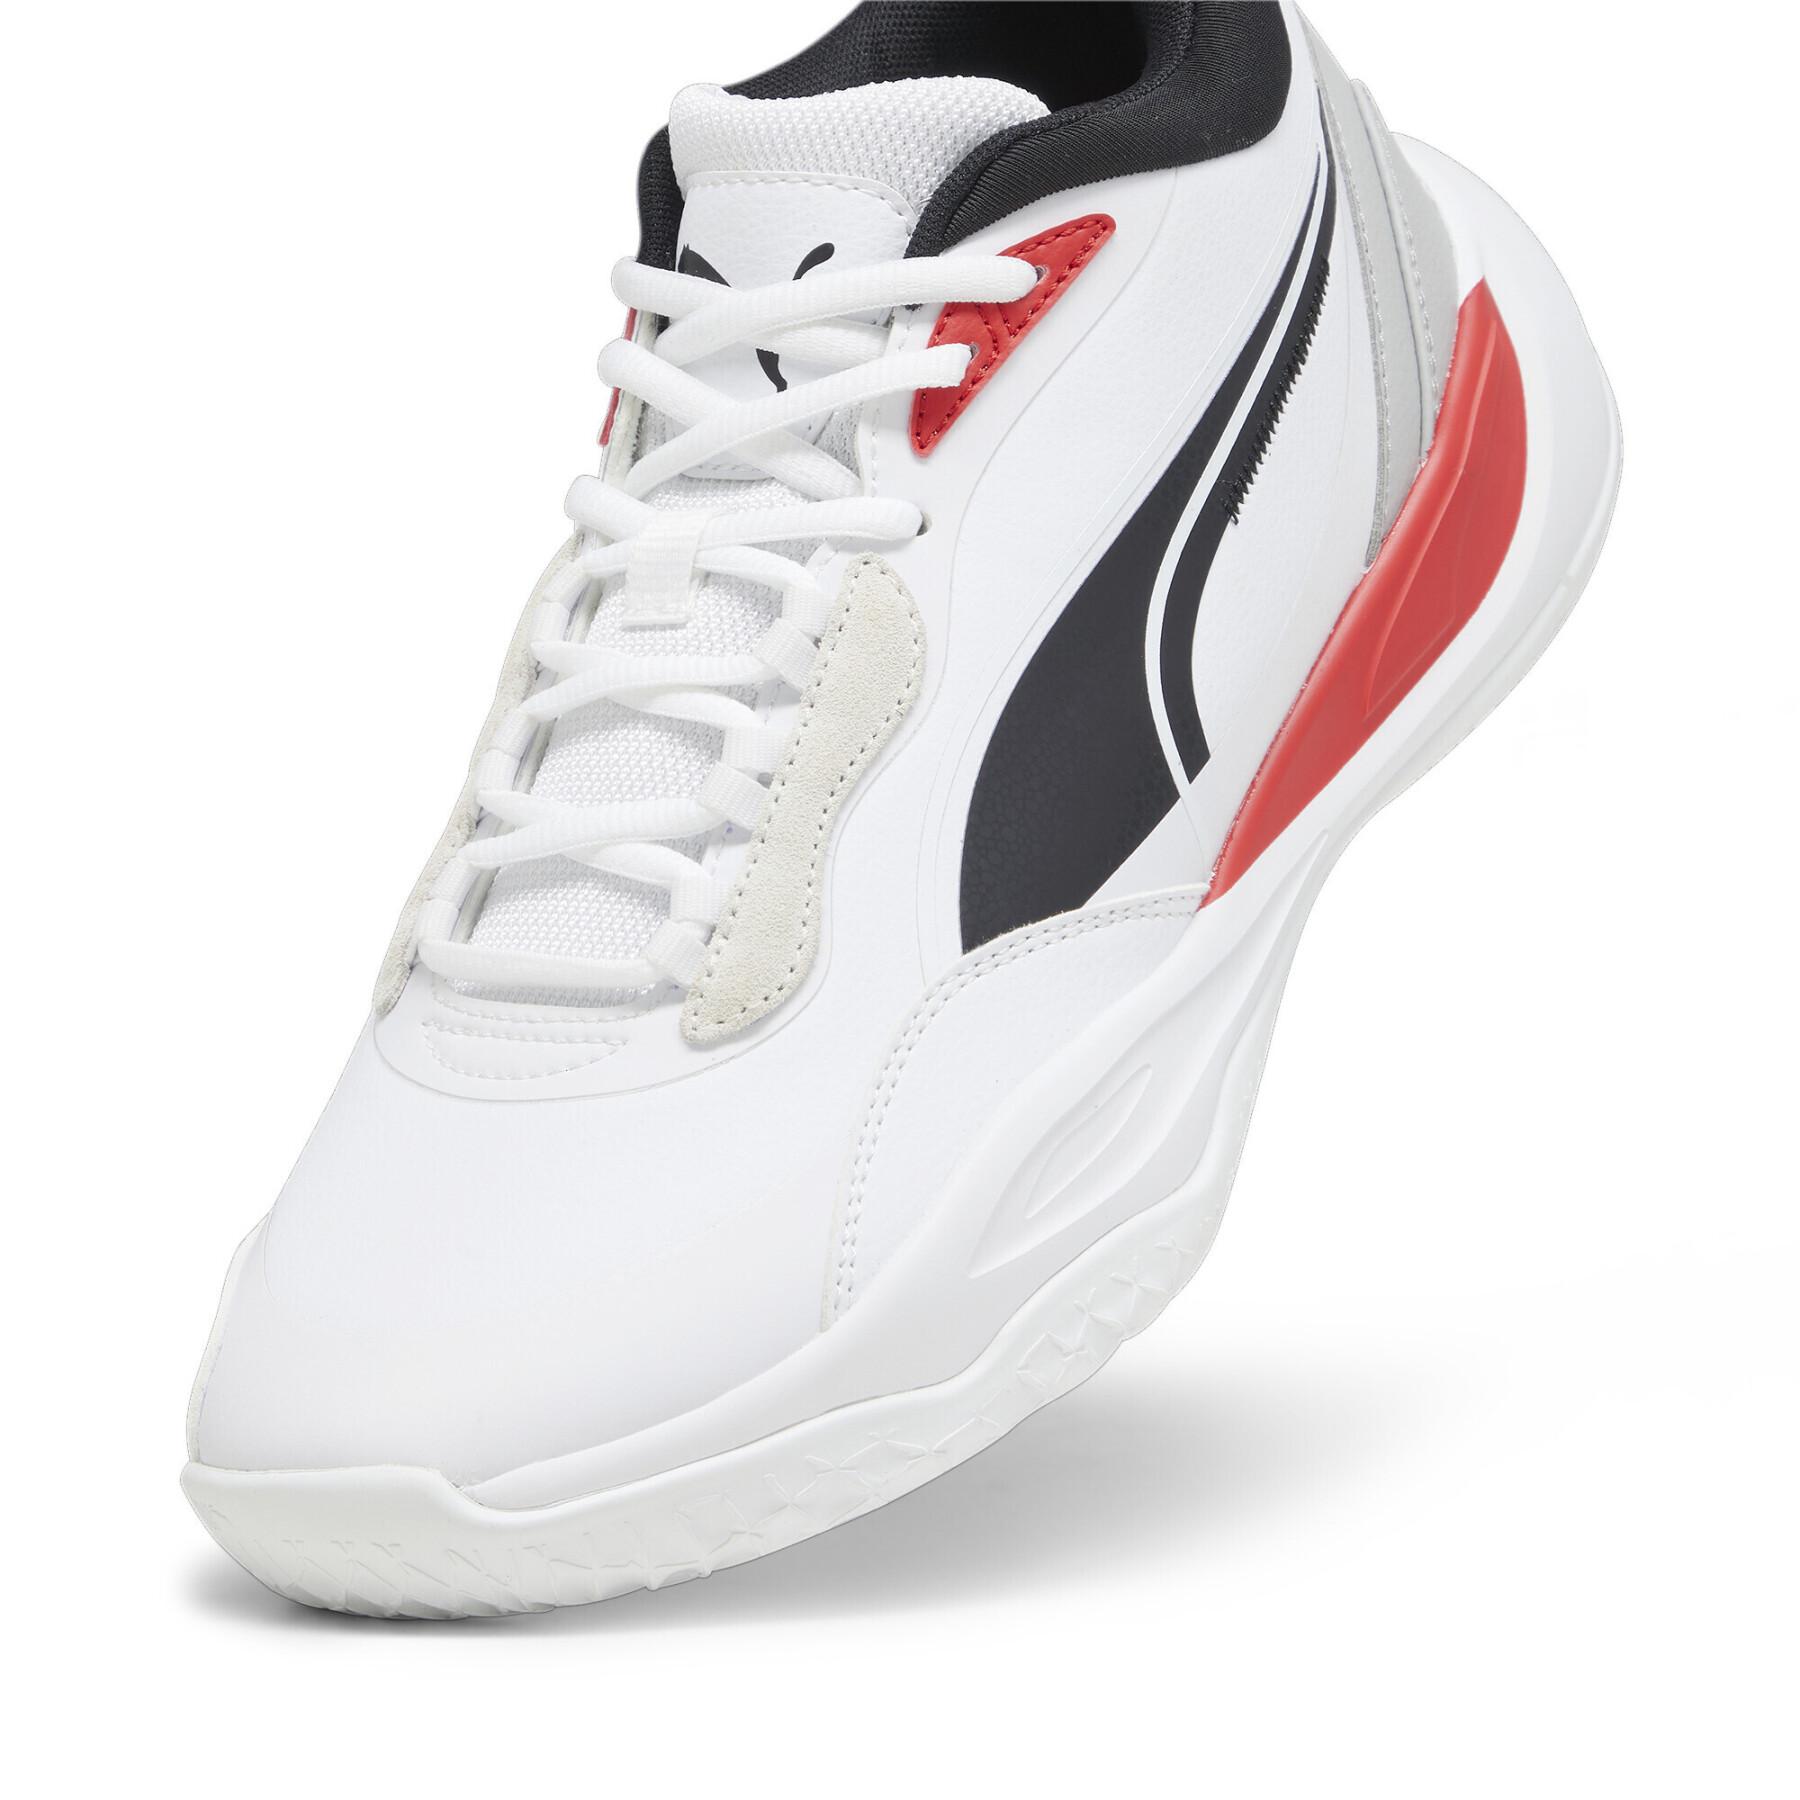 Chaussures indoor Puma Playmaker Pro Plus